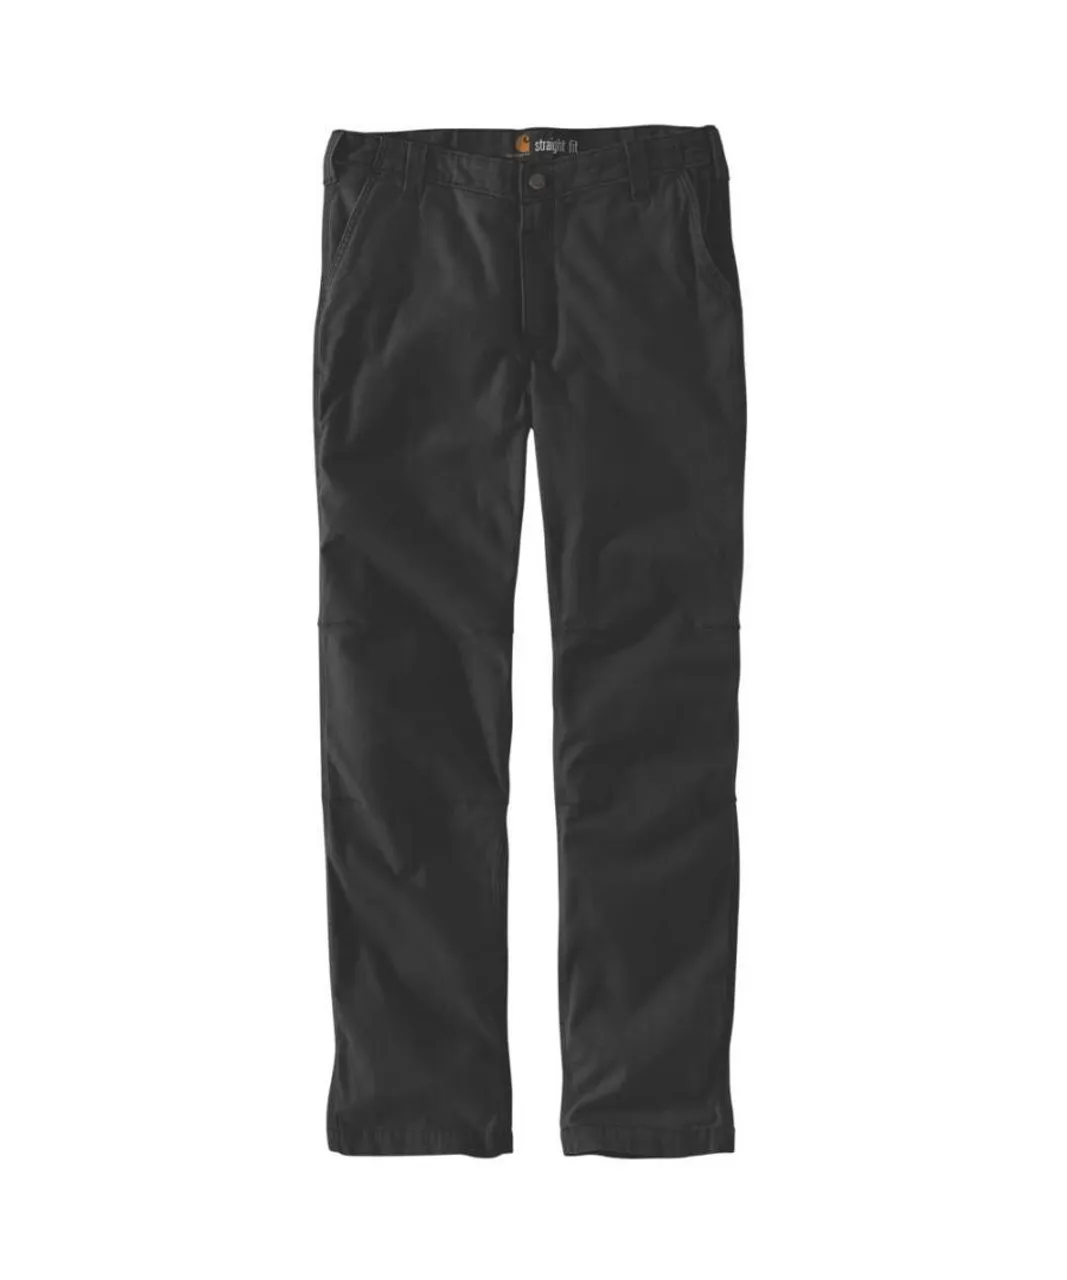 Carhartt Mens Rigby Straight Fit Stretch Work Pants - Black Cotton